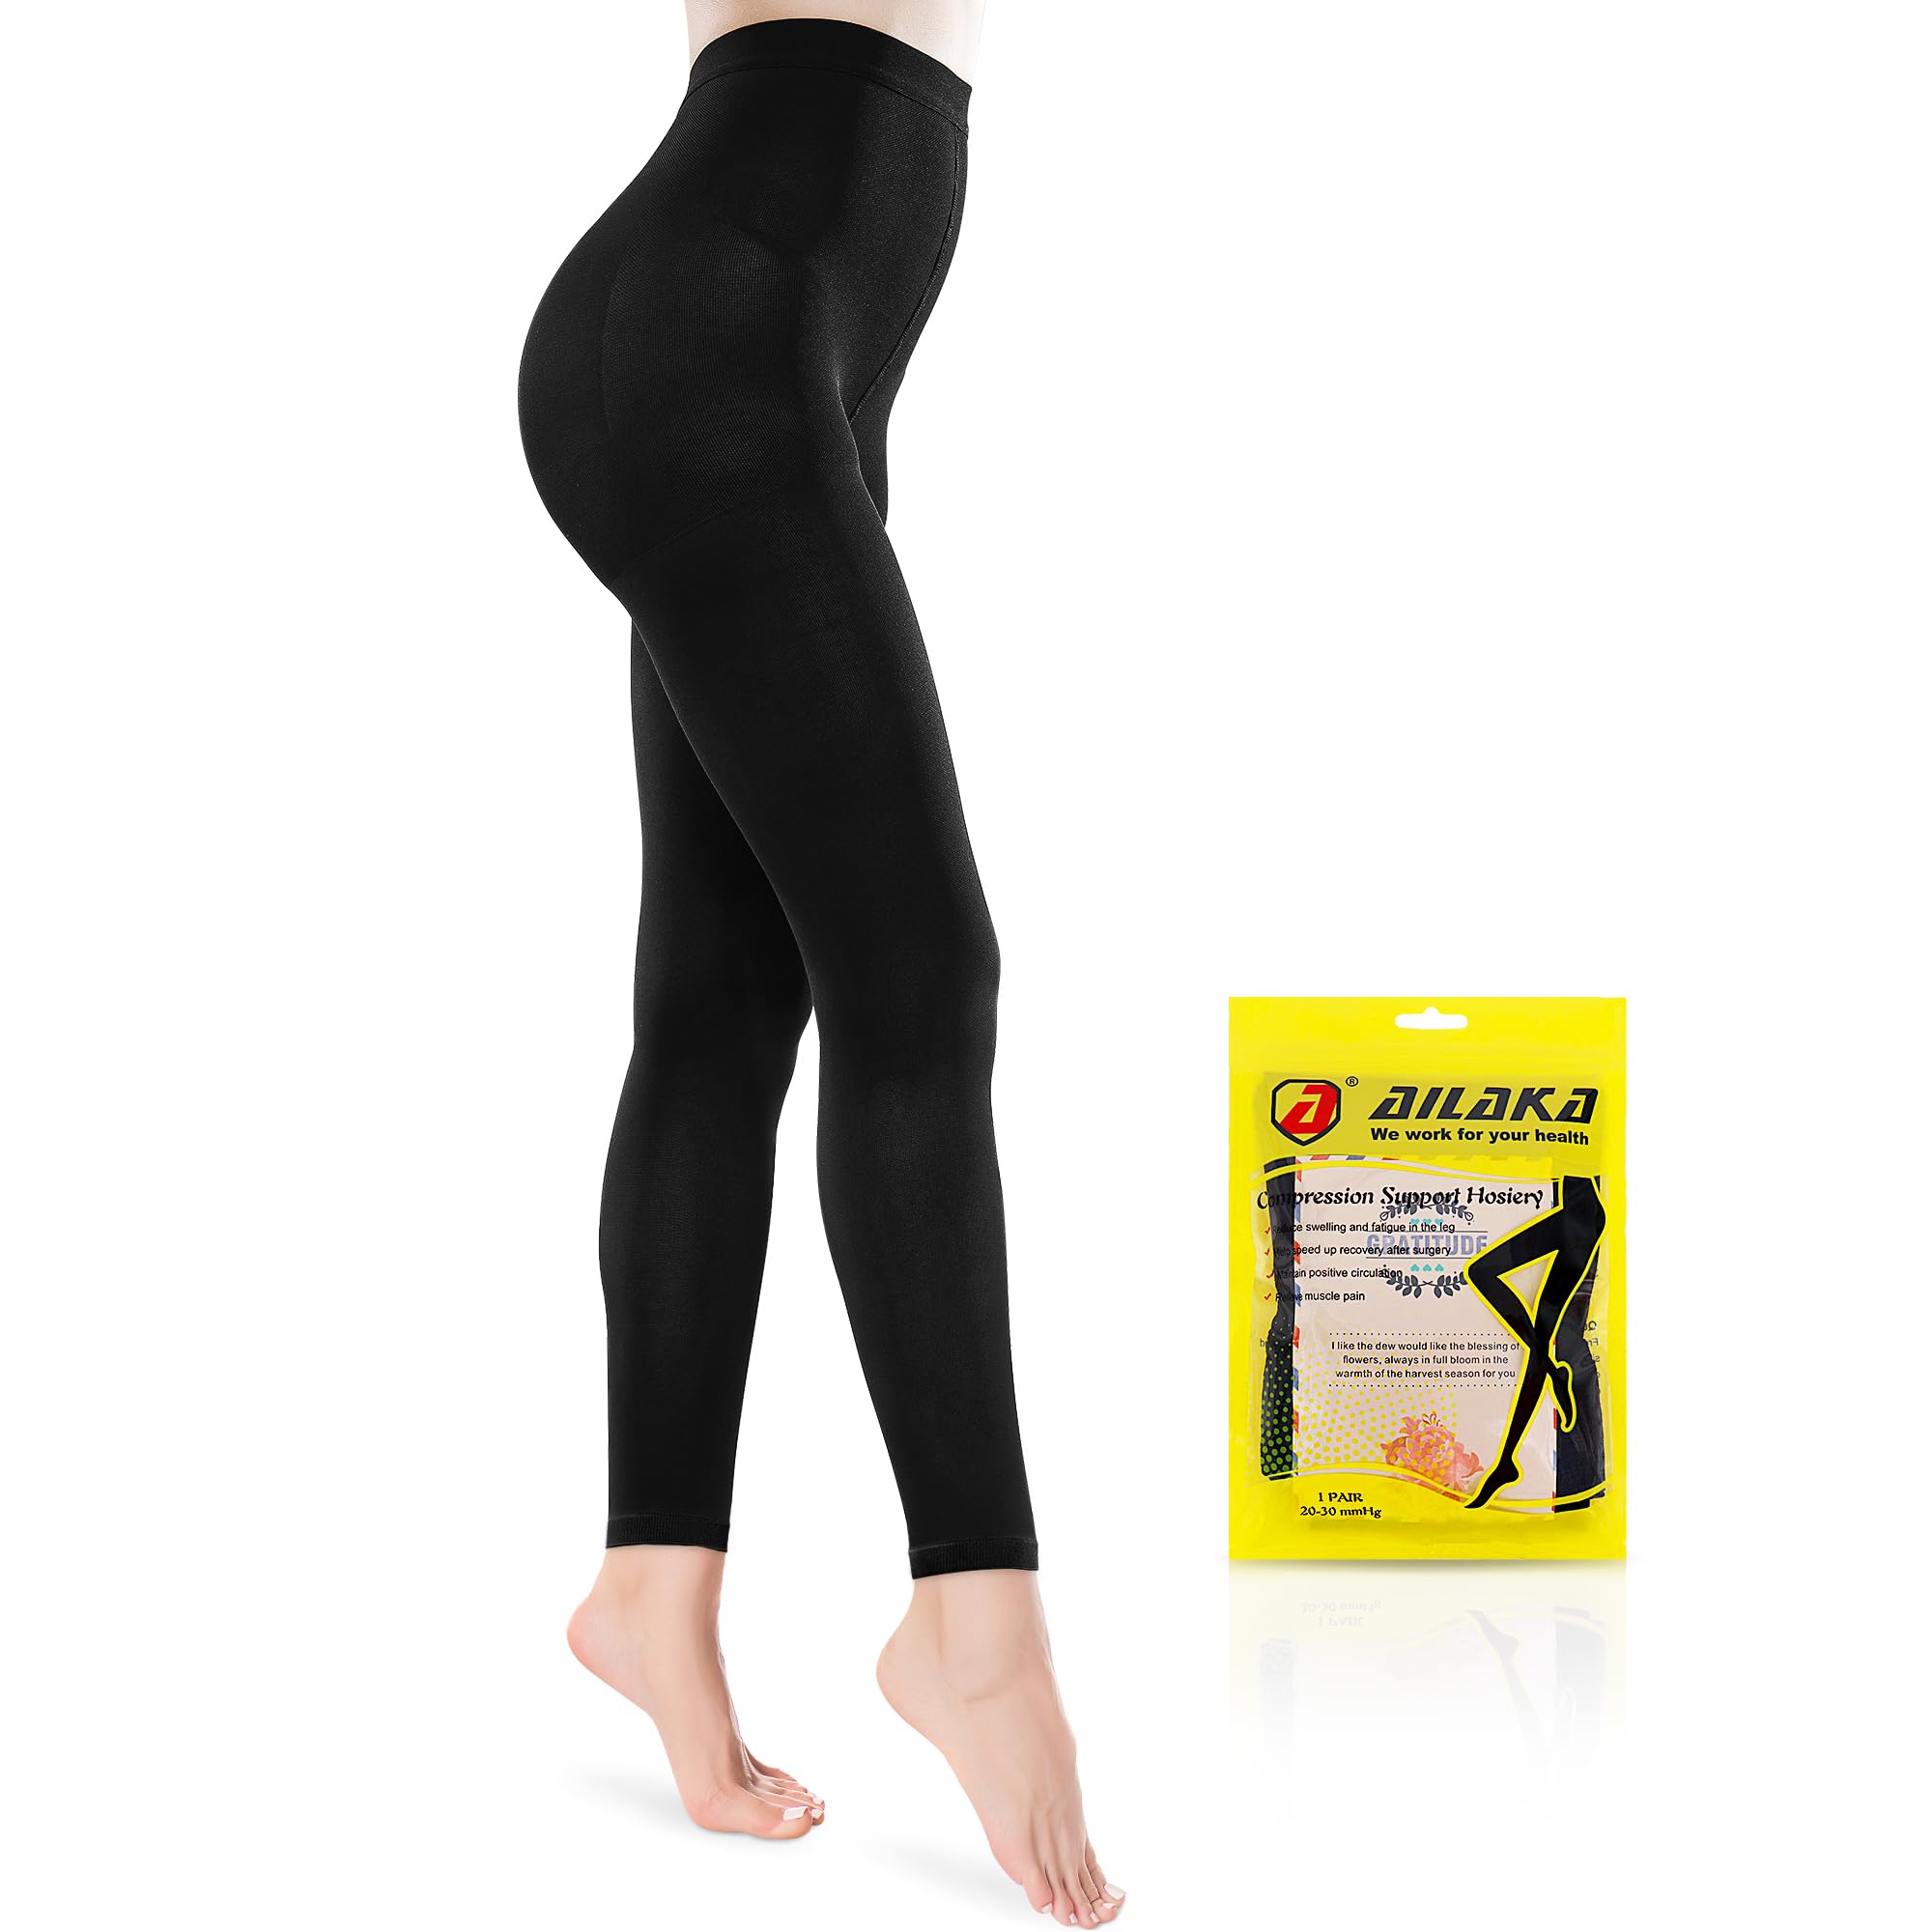 Compression Stockings - What are they? How we can help!